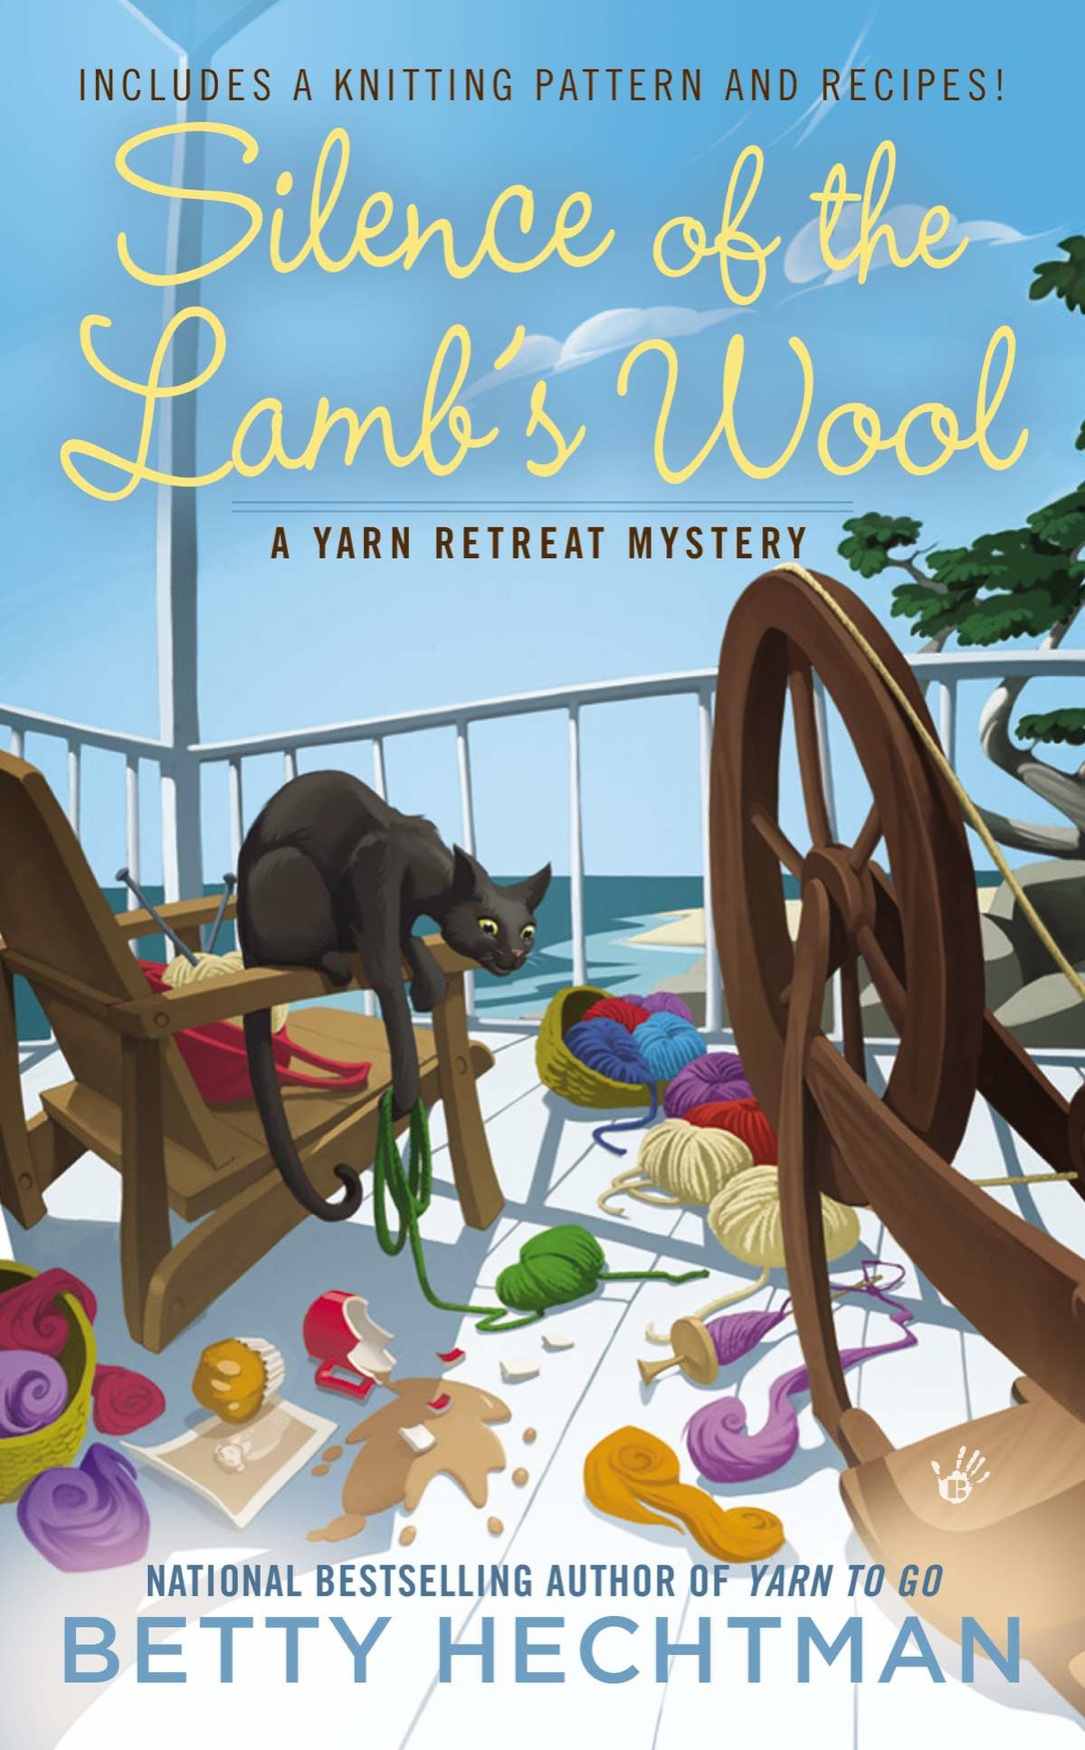 Silence of the Lamb's Wool (A Yarn Retreat Mystery) by Betty Hechtman